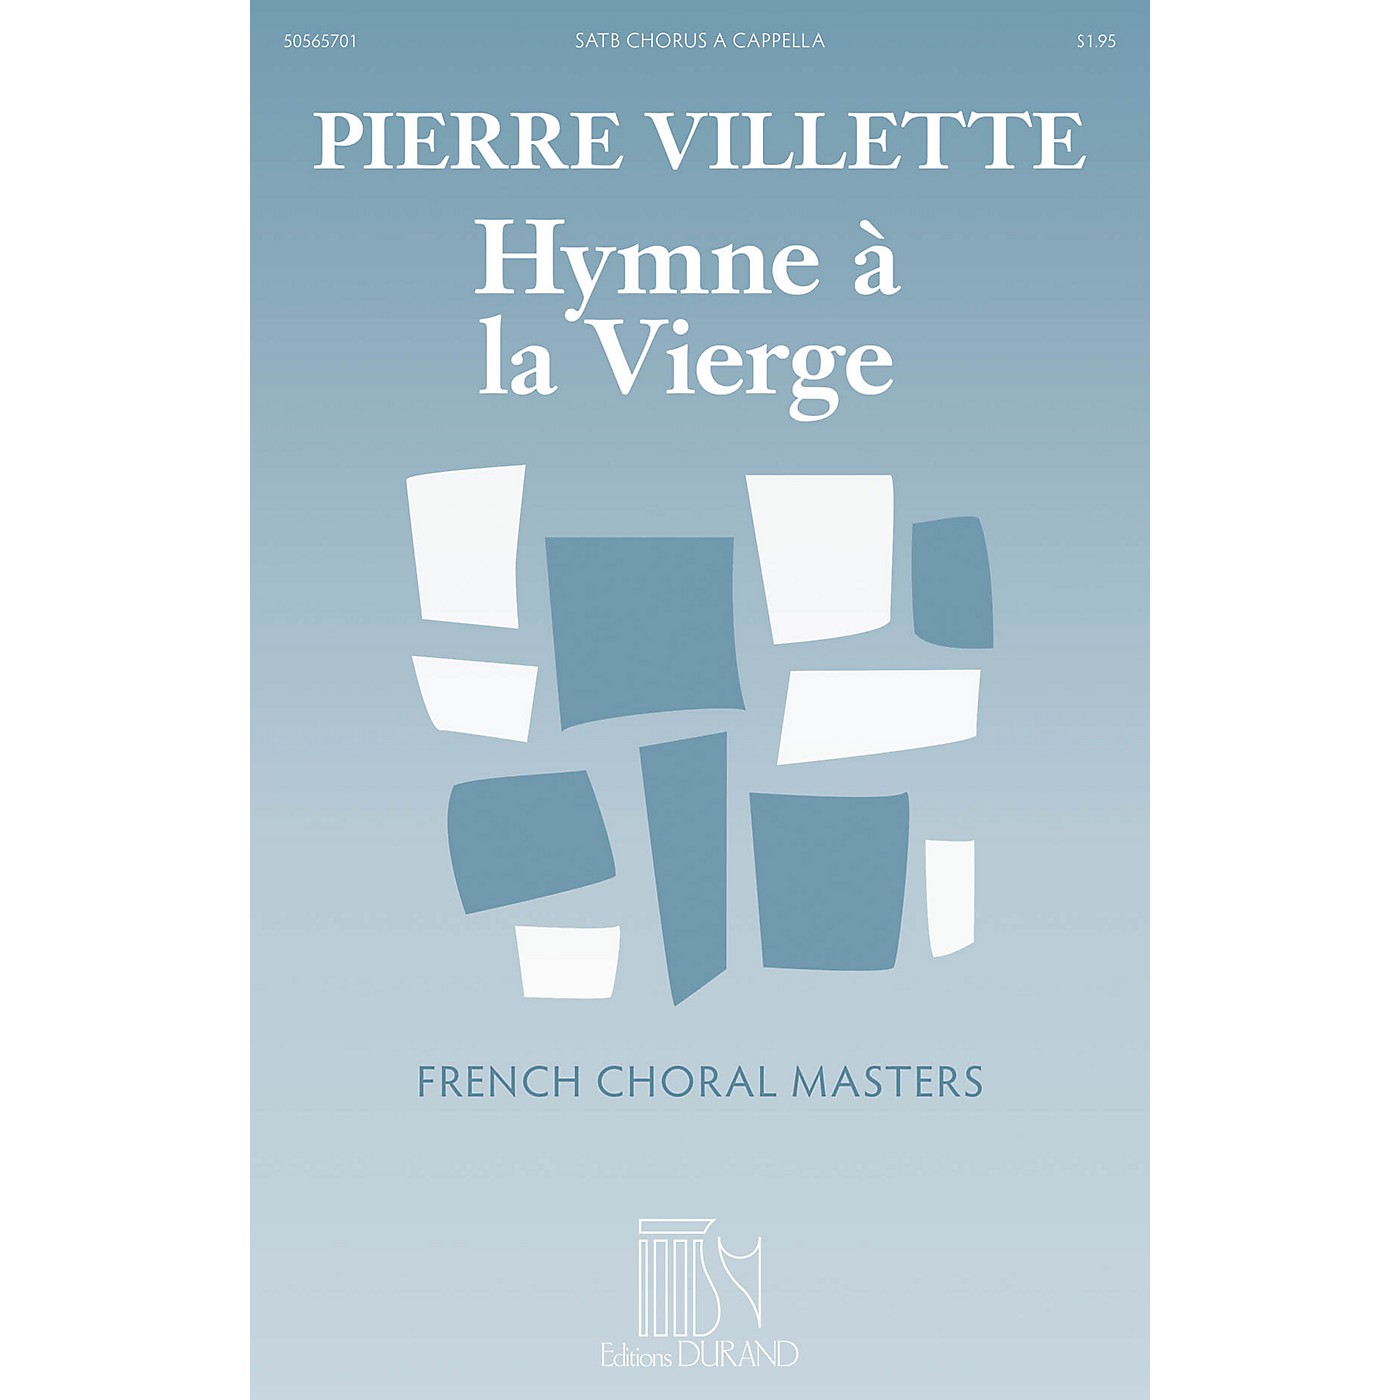 Durand Hymne a la Vierge (Hymn to the Virgin) (French Choral Masters Series) SATB a cappella by Pierre Villette thumbnail